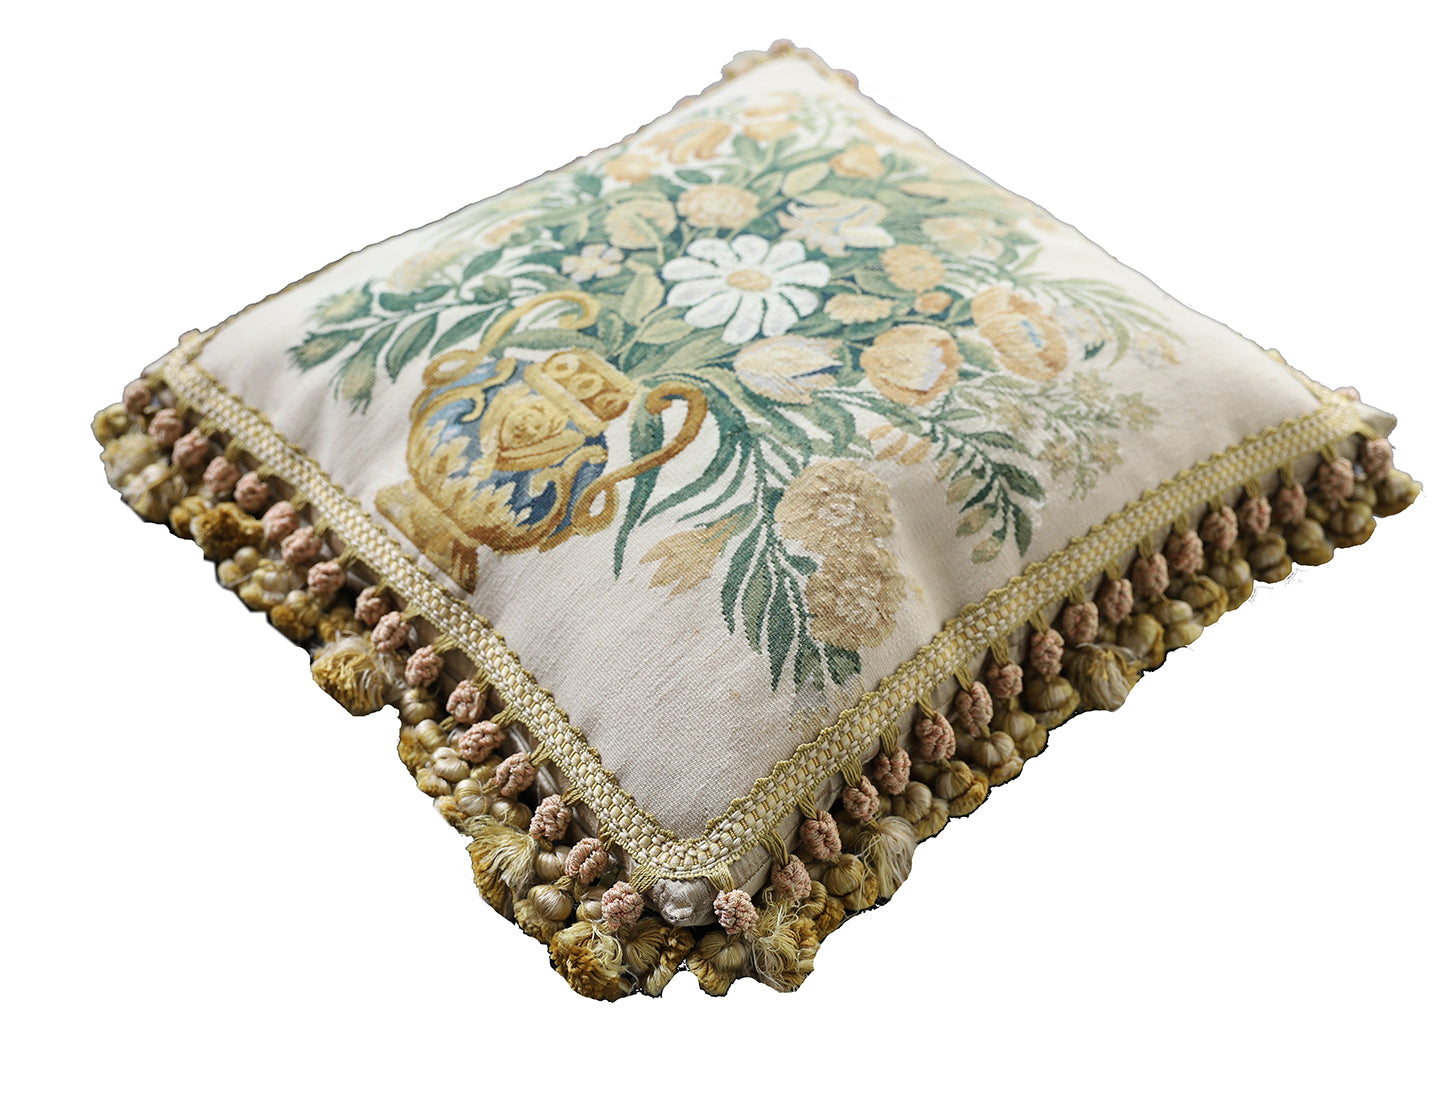 19"x18" Hand Woven Aubusson Tapestry Pillow Case